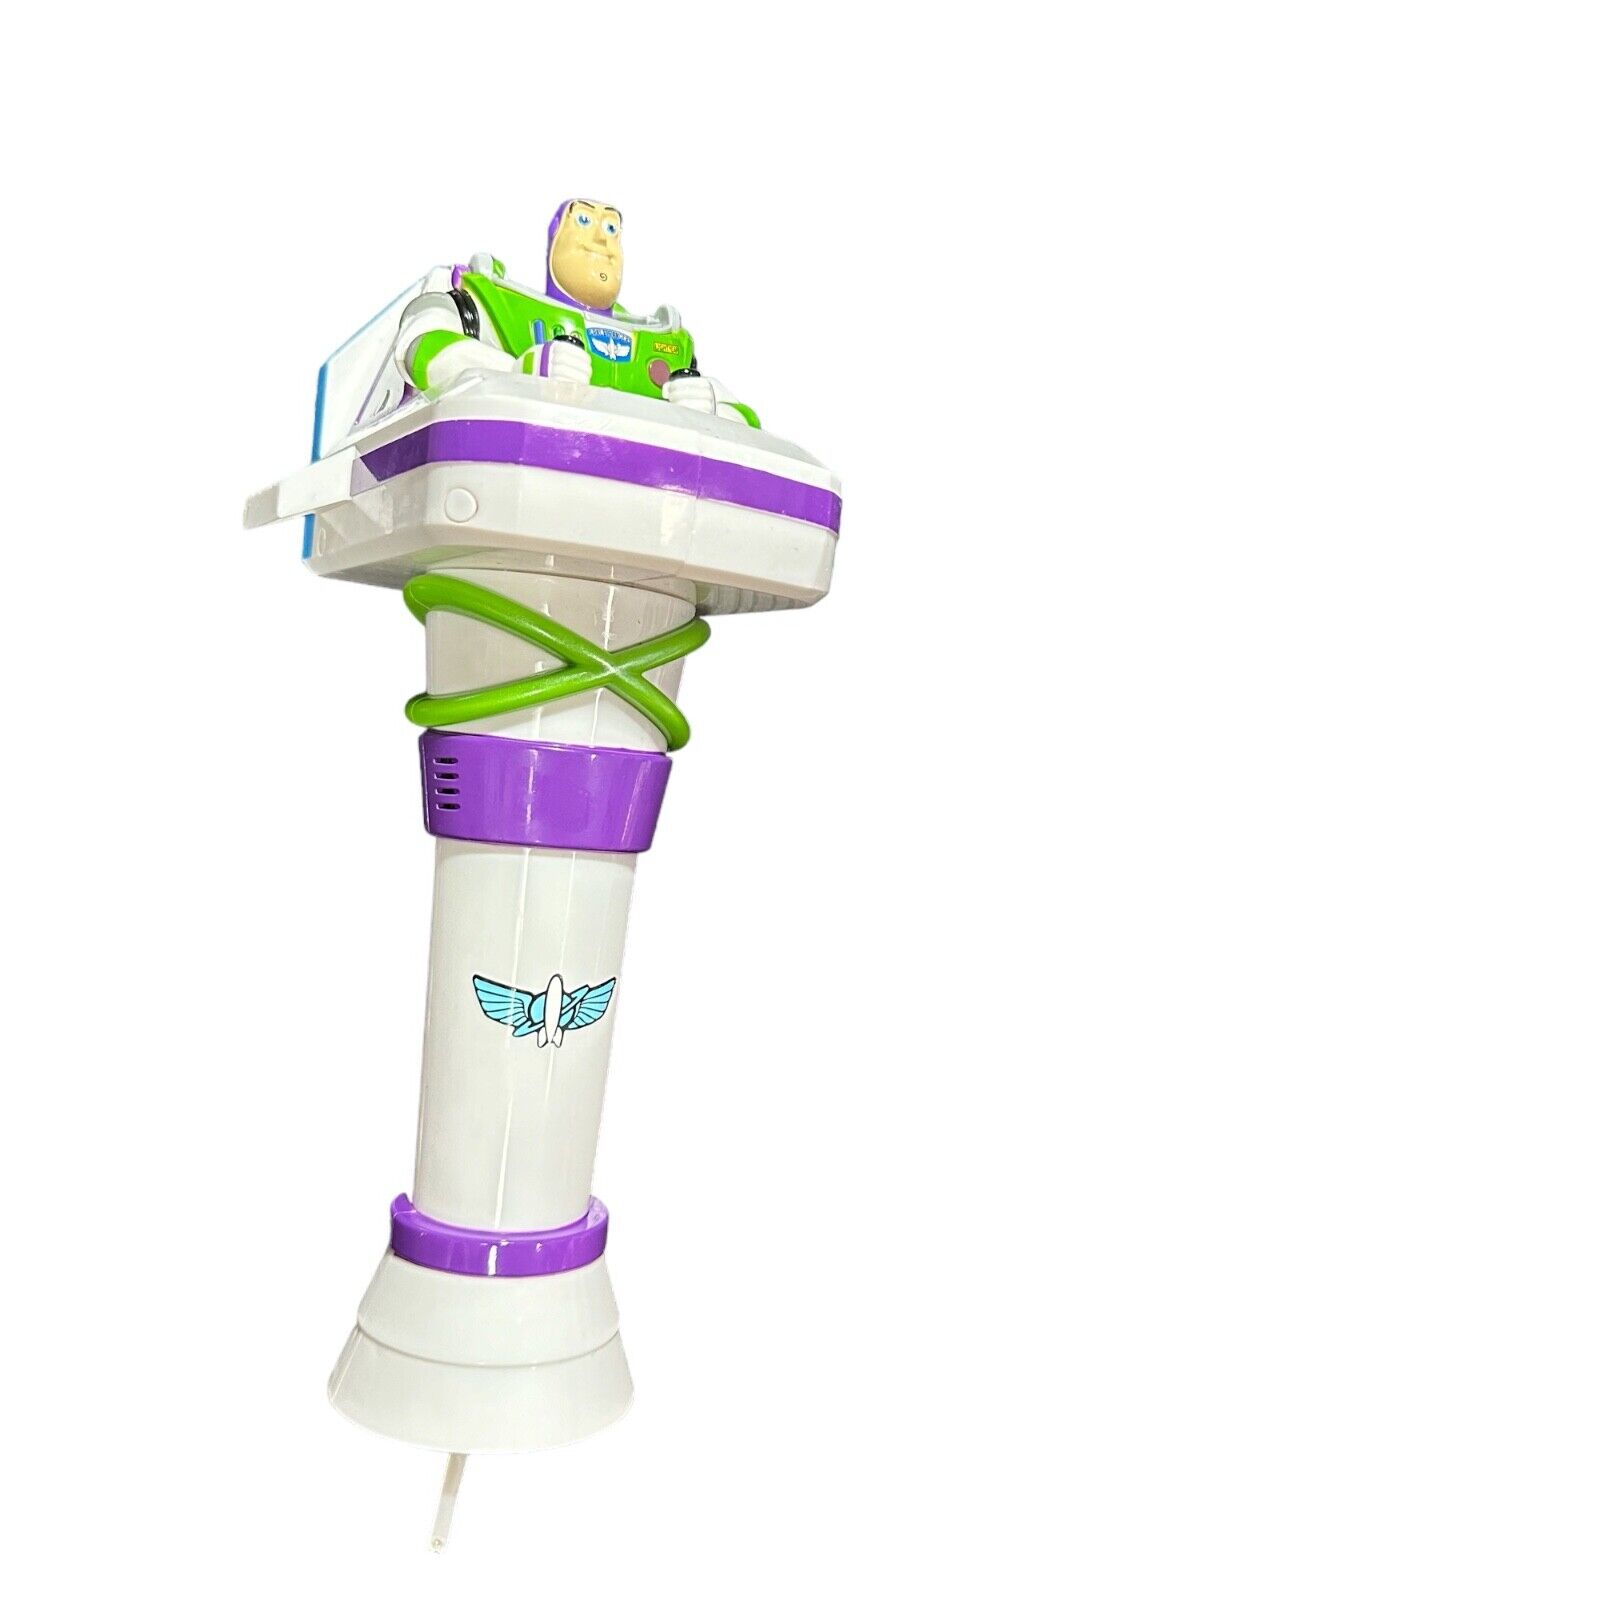 Disney Parks Toy Story Buzz Lightyear Light-Up Bubble Wand TESTED